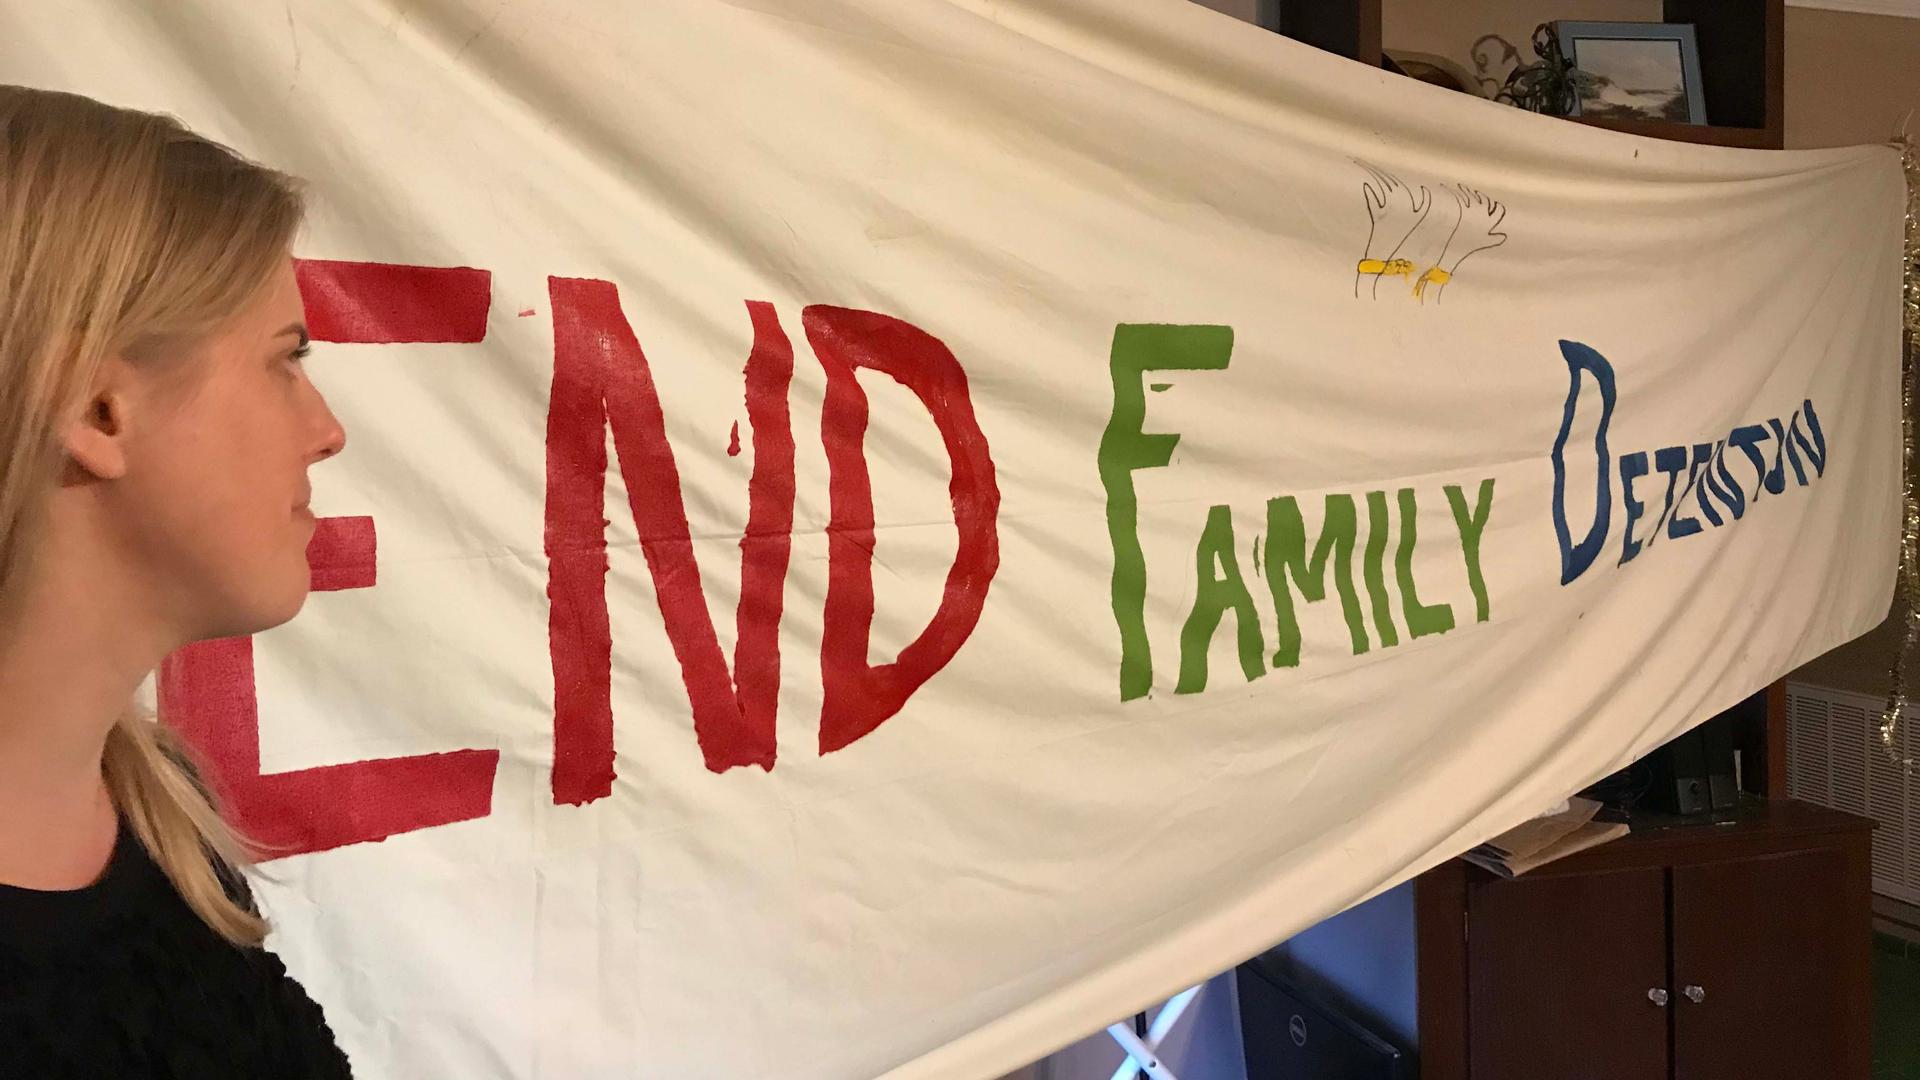 A woman stands in front of a banner reading "End Family Detention"